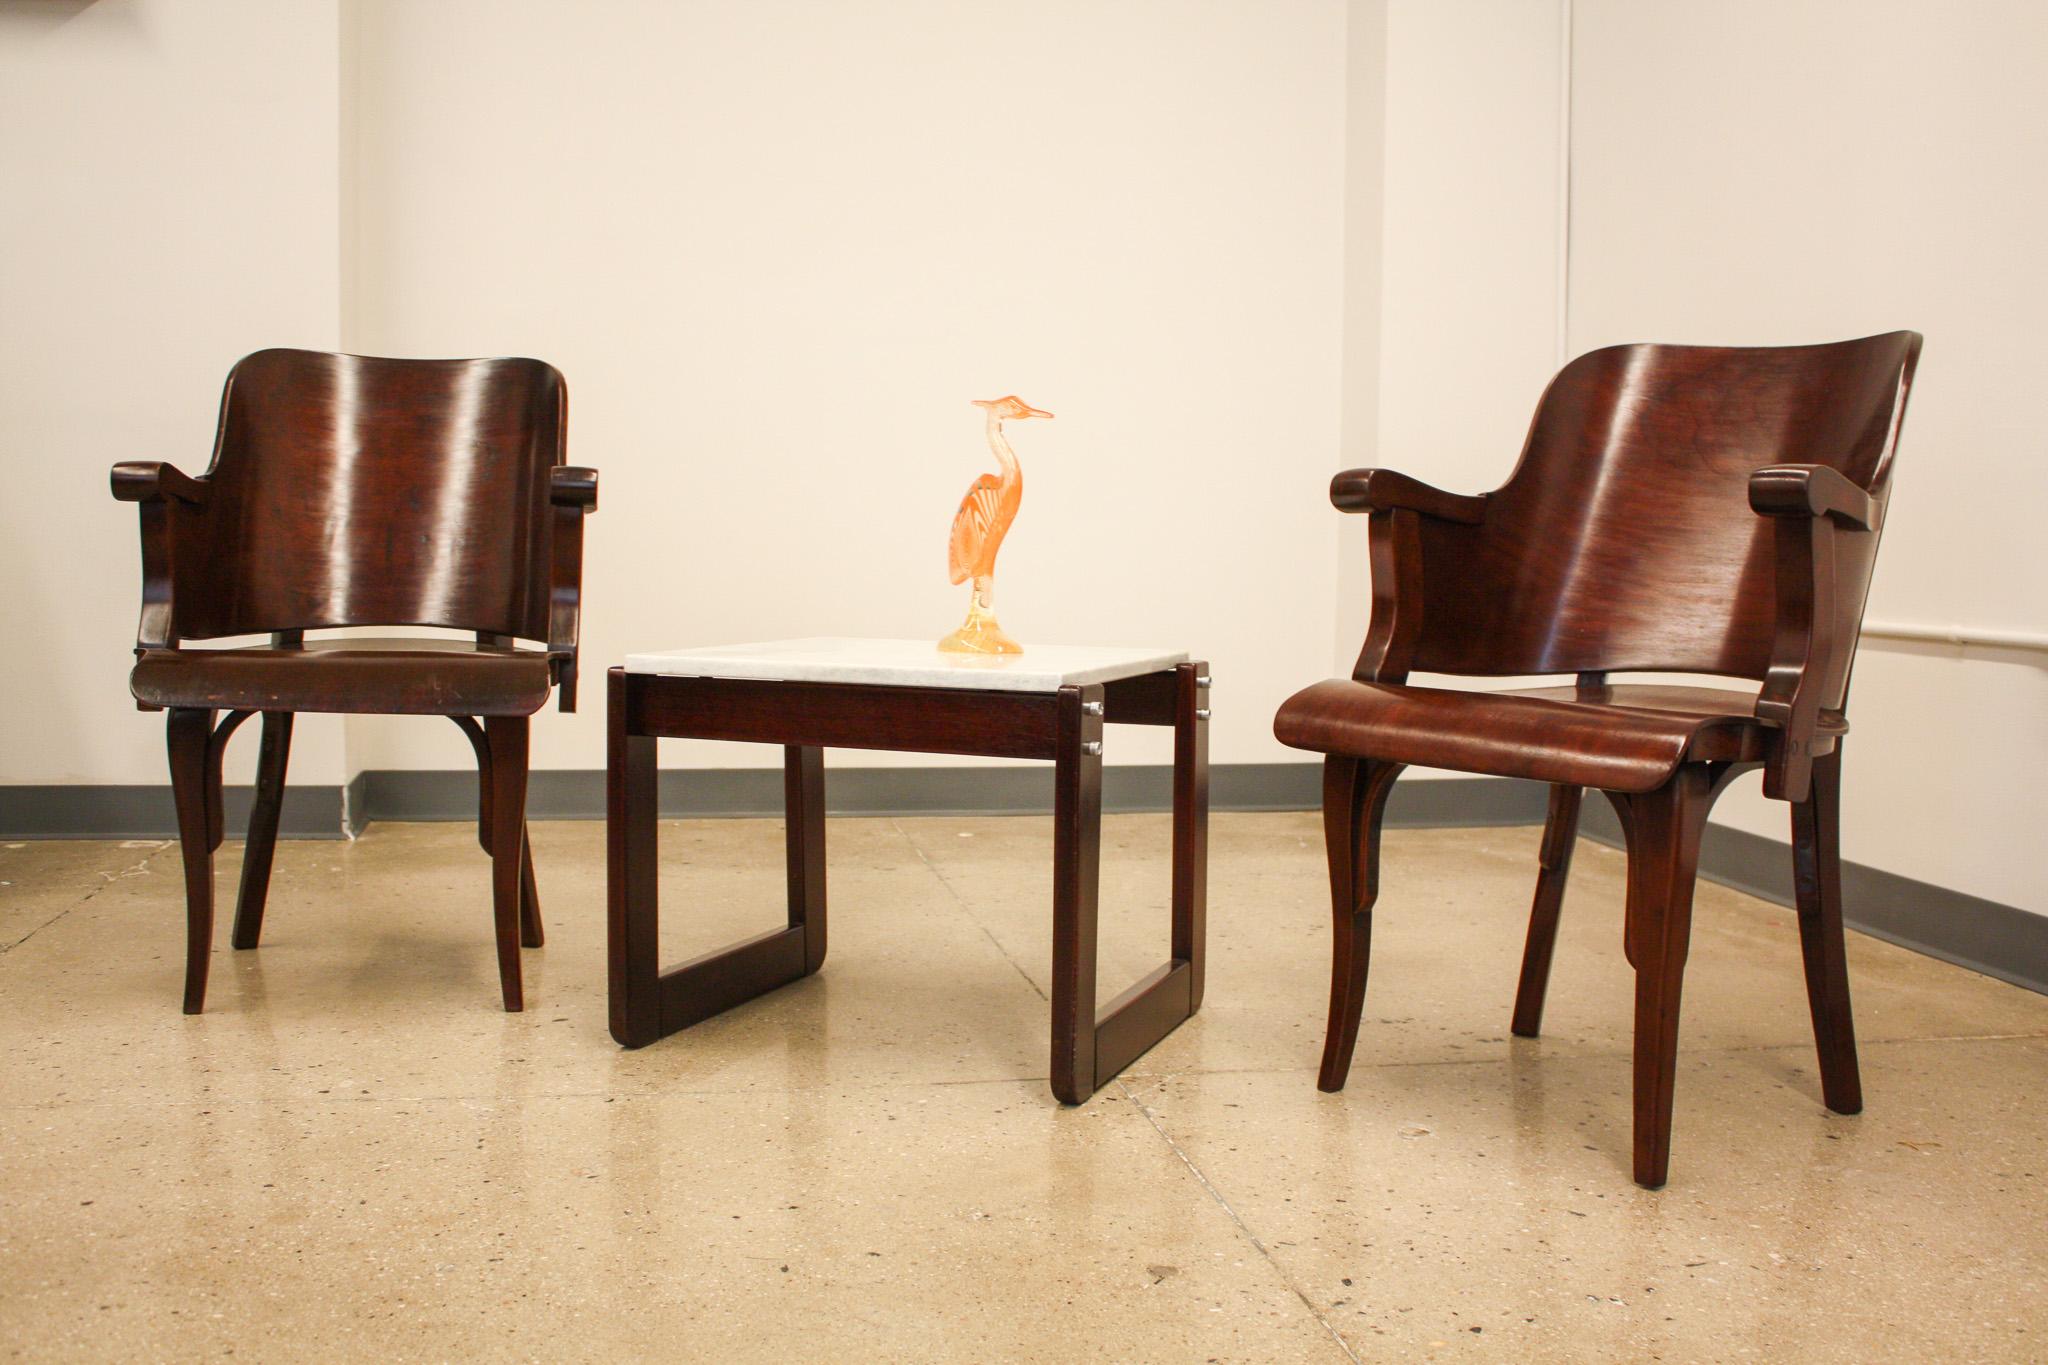 Brazilian Modern Armchairs in Brown Bentwood by Cimo, 1950, Brazil, Sealed 8